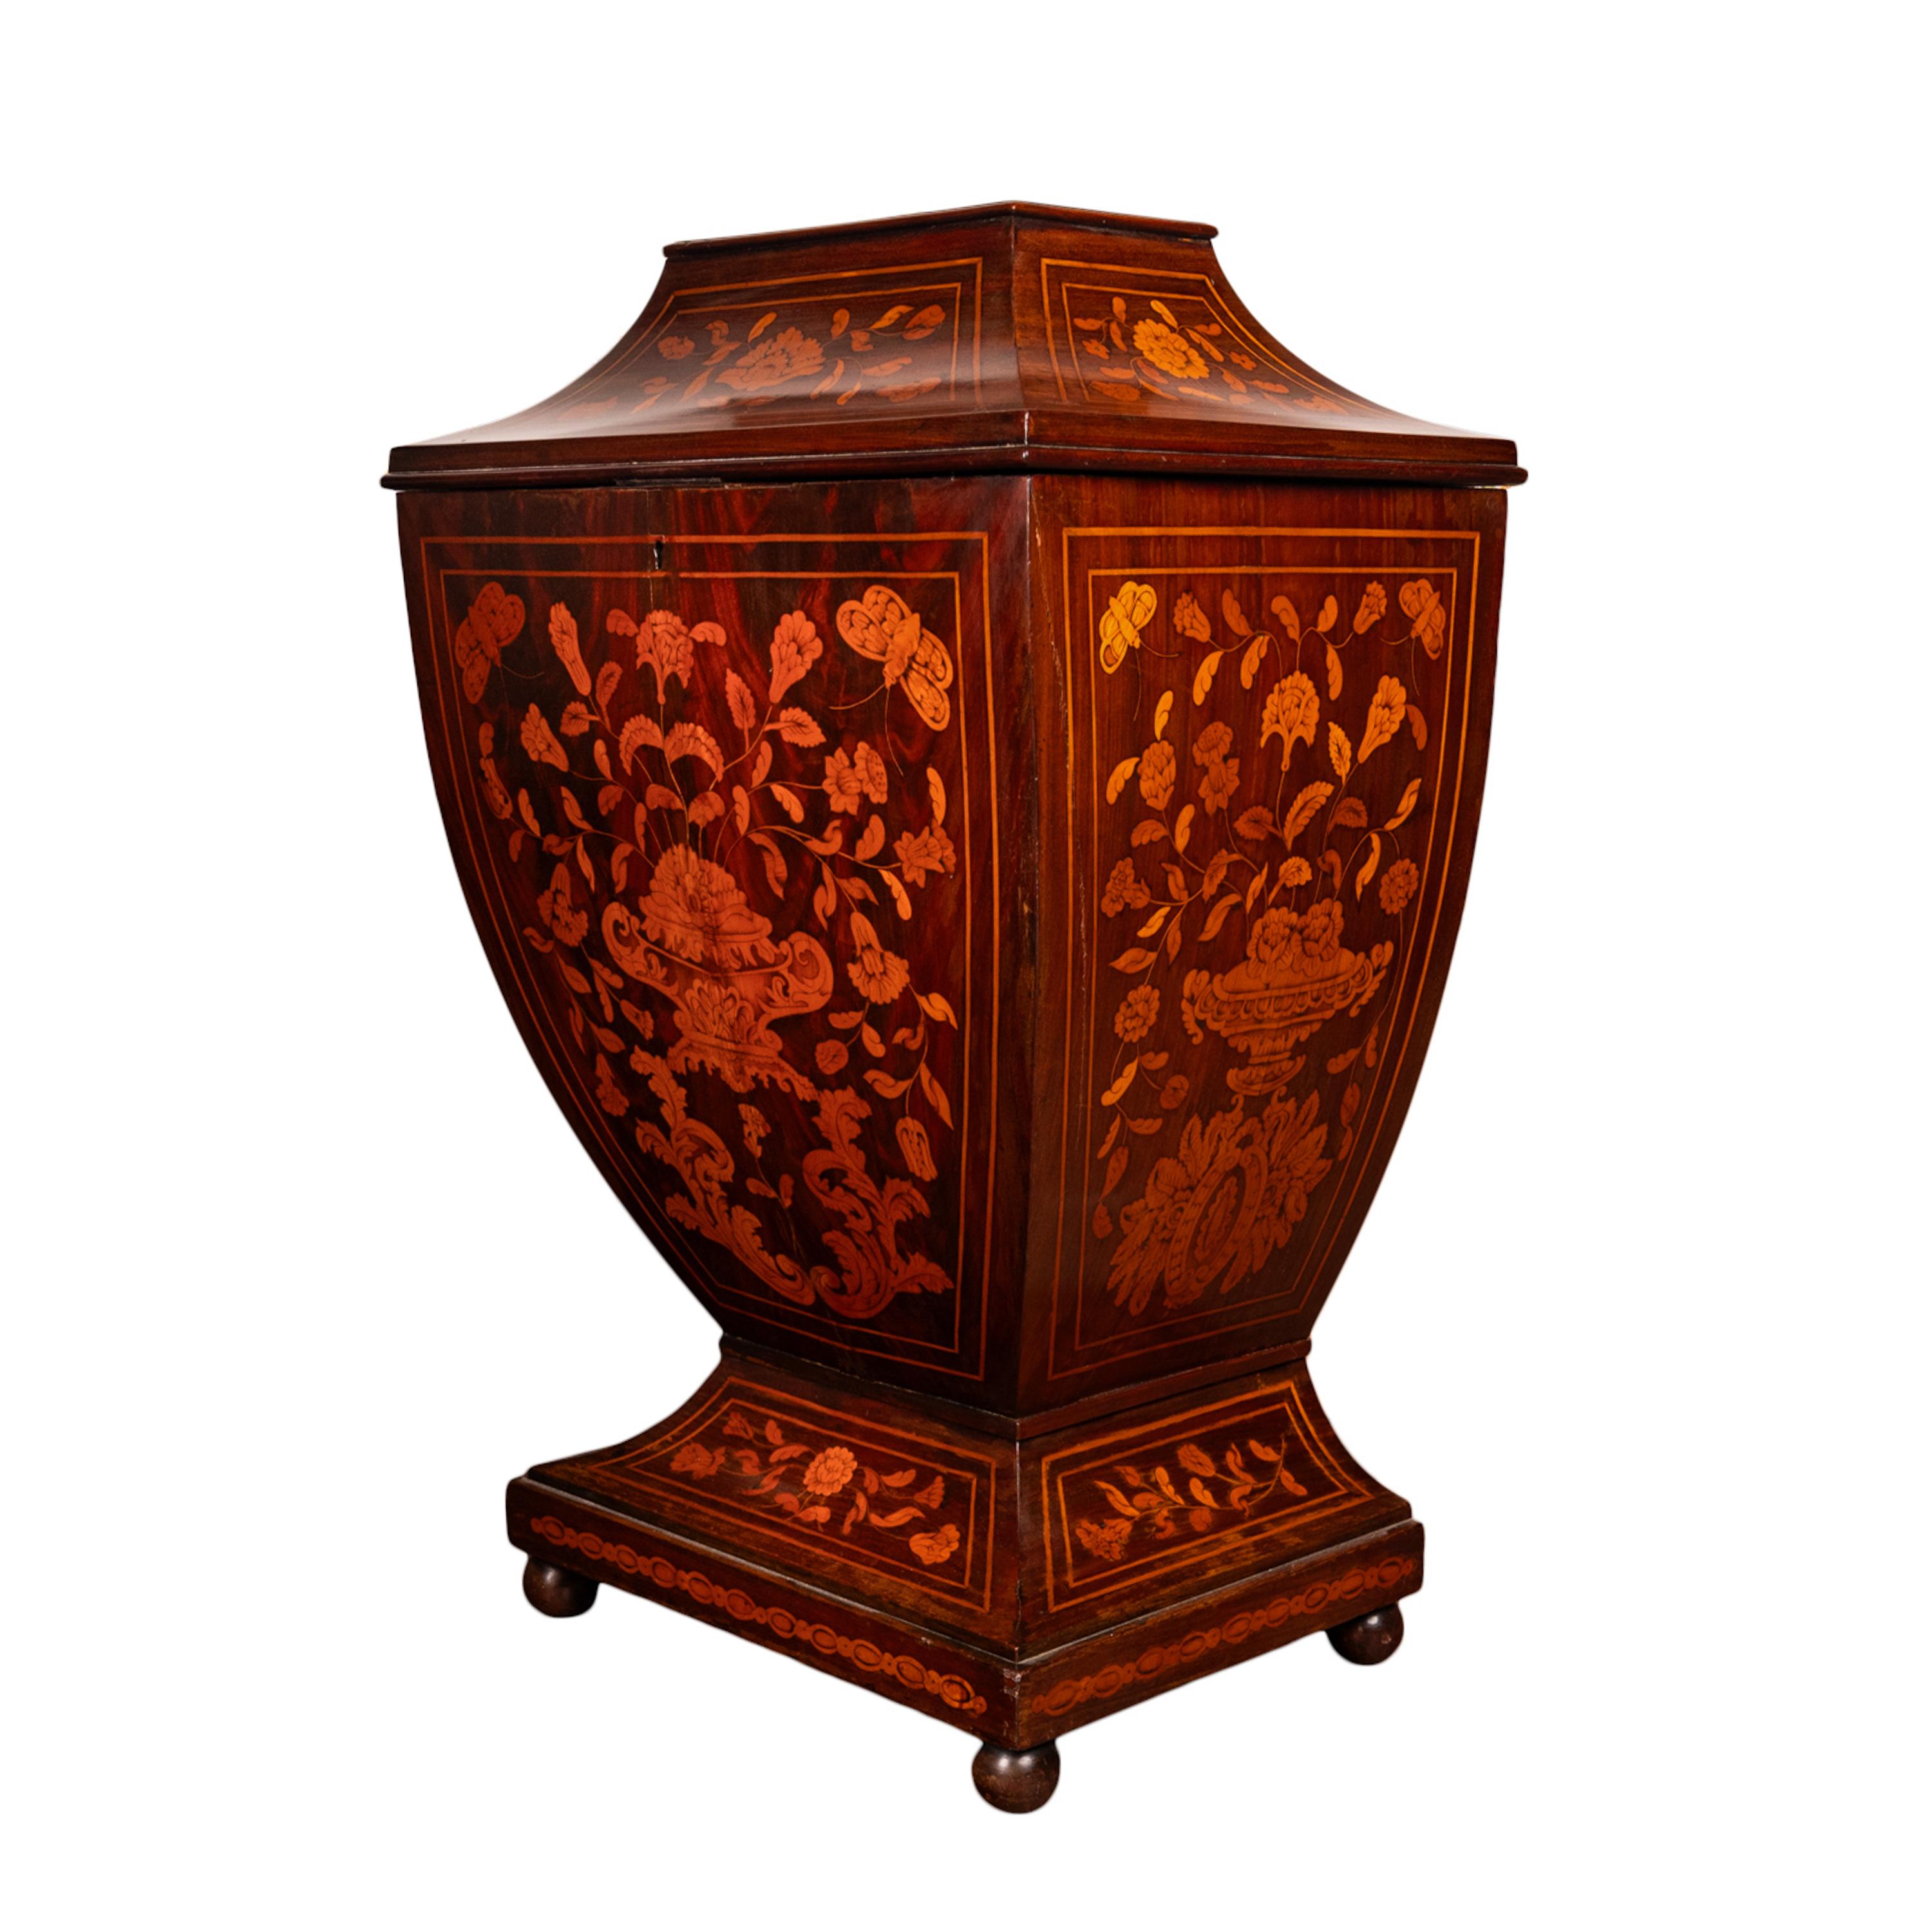 Mid-18th Century Antique 18th Century Dutch Marquetry Bombe Shaped Wine Cellerette Cooler 1760 For Sale